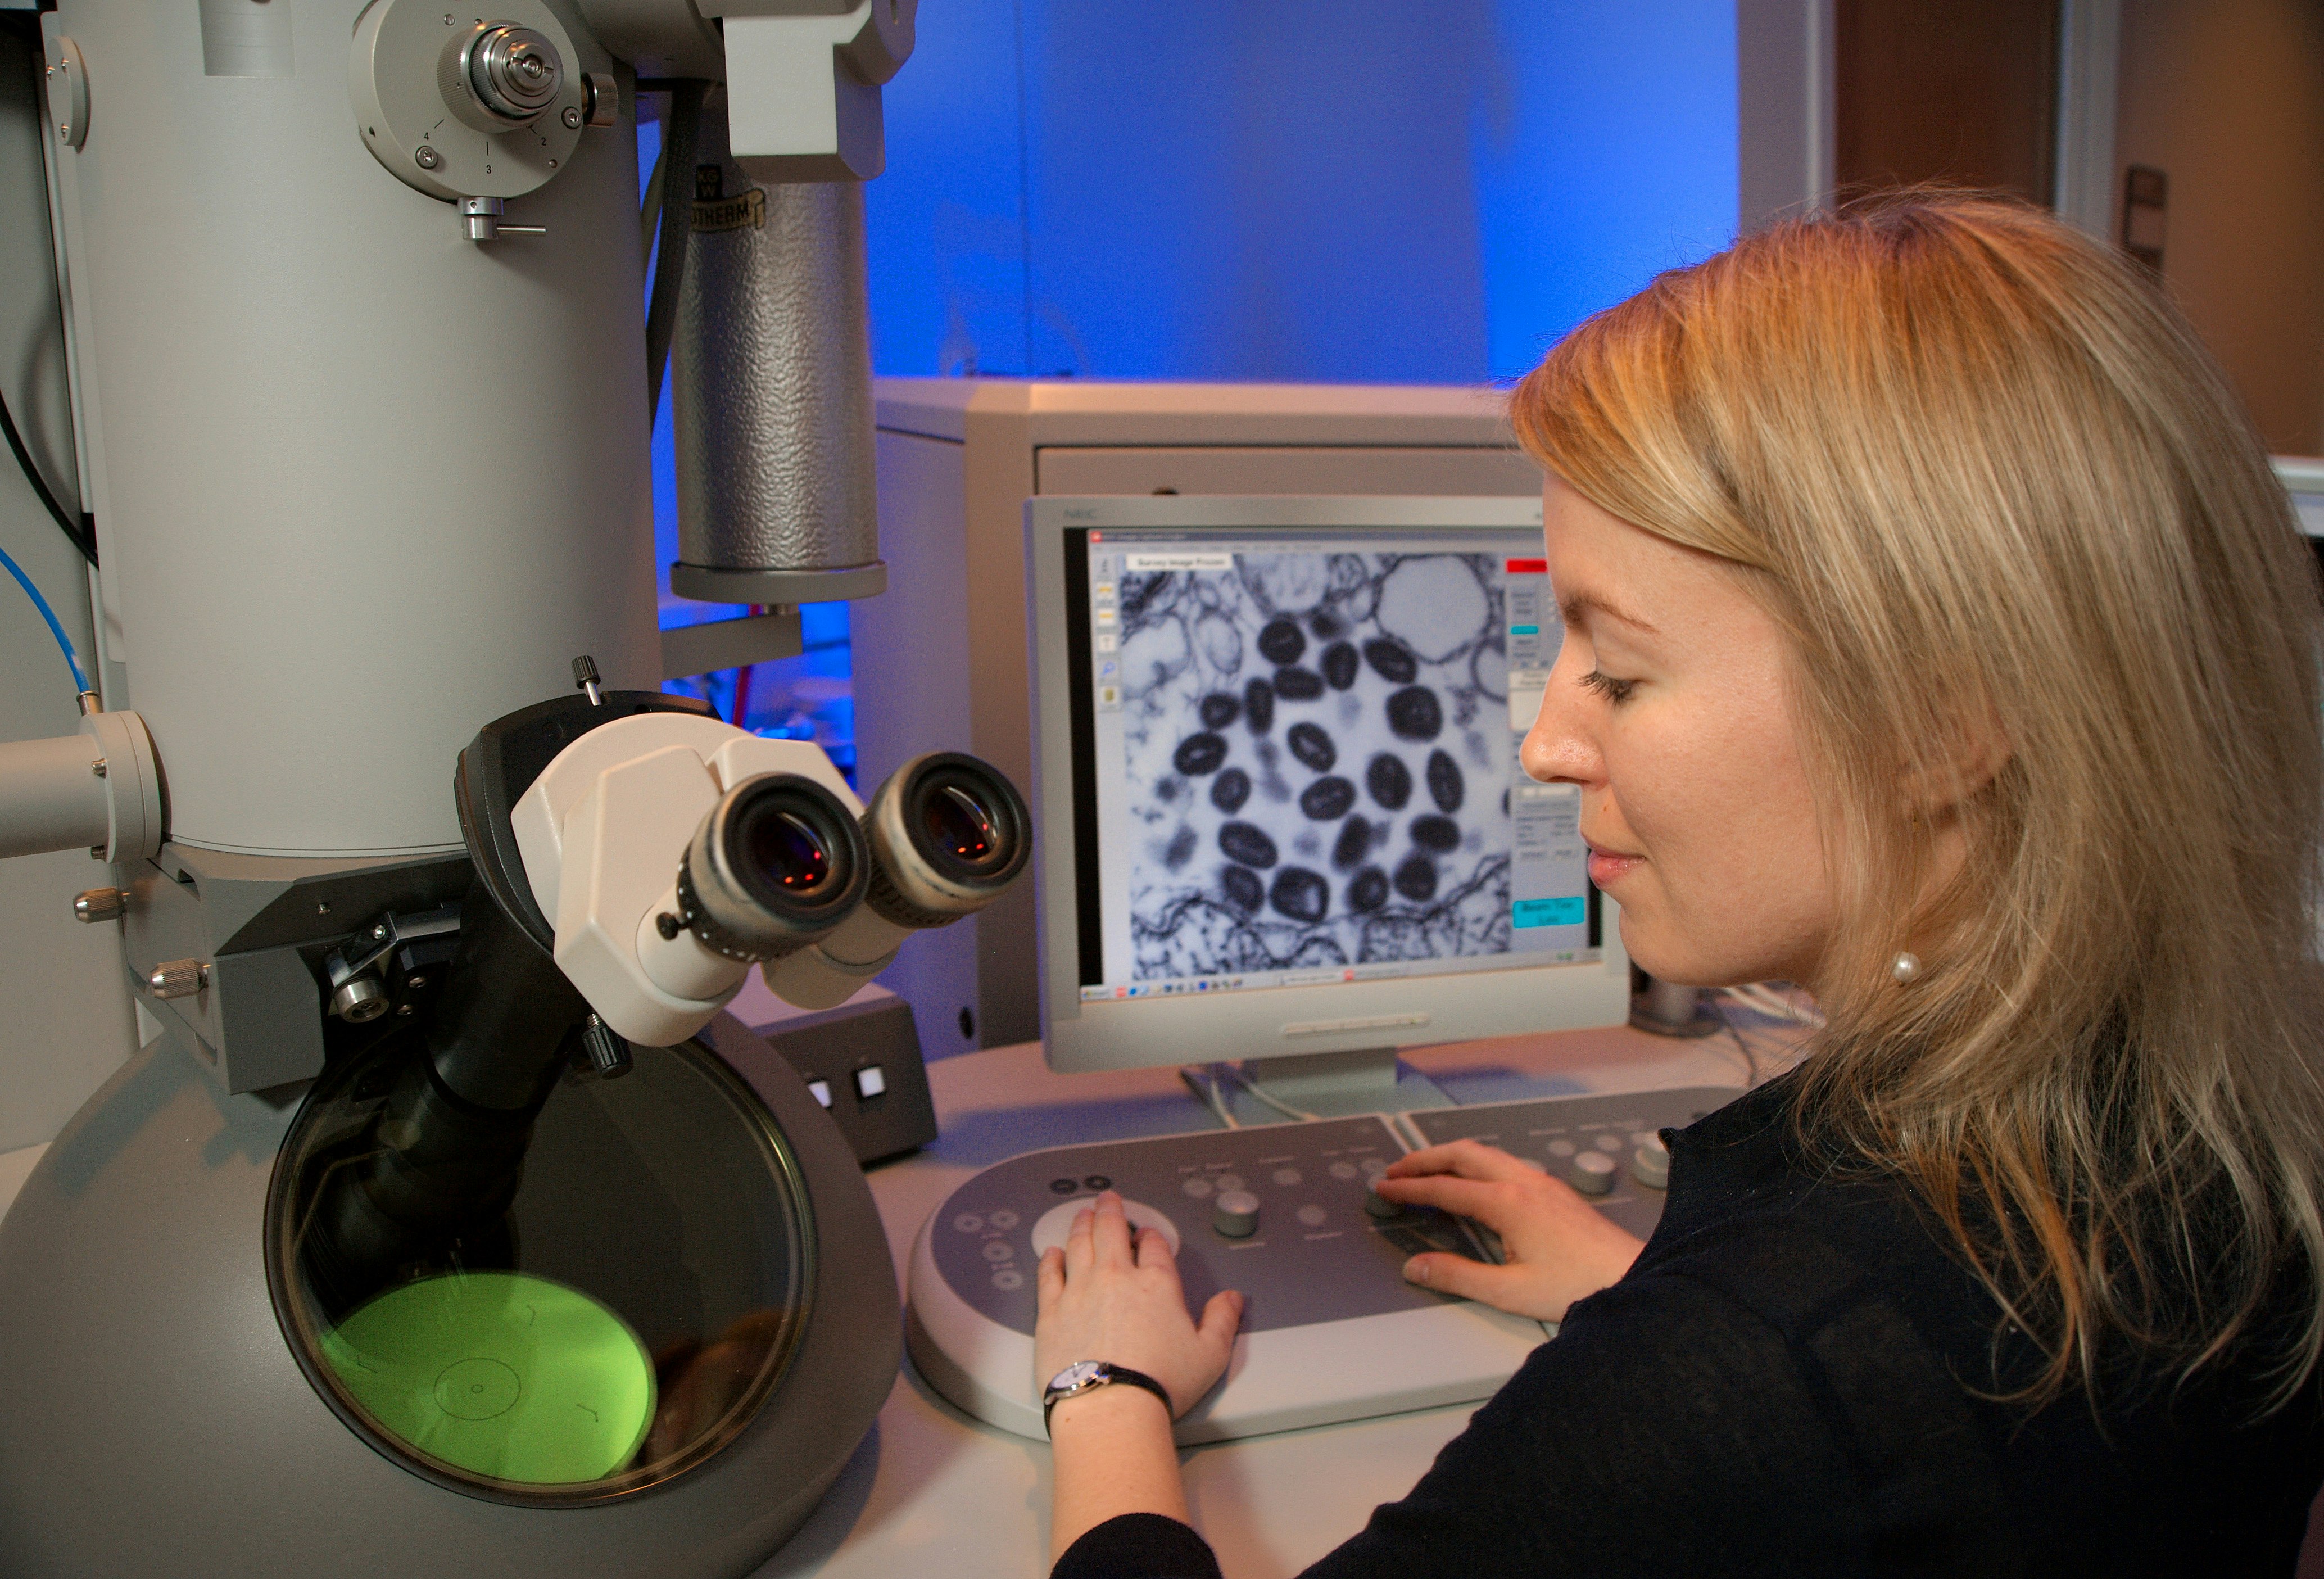 This image depicts Centers for Disease Control and Prevention (CDC) intern, Maureen Metcalfe, as she was using one of the agency’s transmission electron microscopes (TEM). The microscope’s screen was displaying a thin section of the variola virus, revealing some of the ultrastructural features displayed by this pathogenic organism, which is the cause of smallpox.